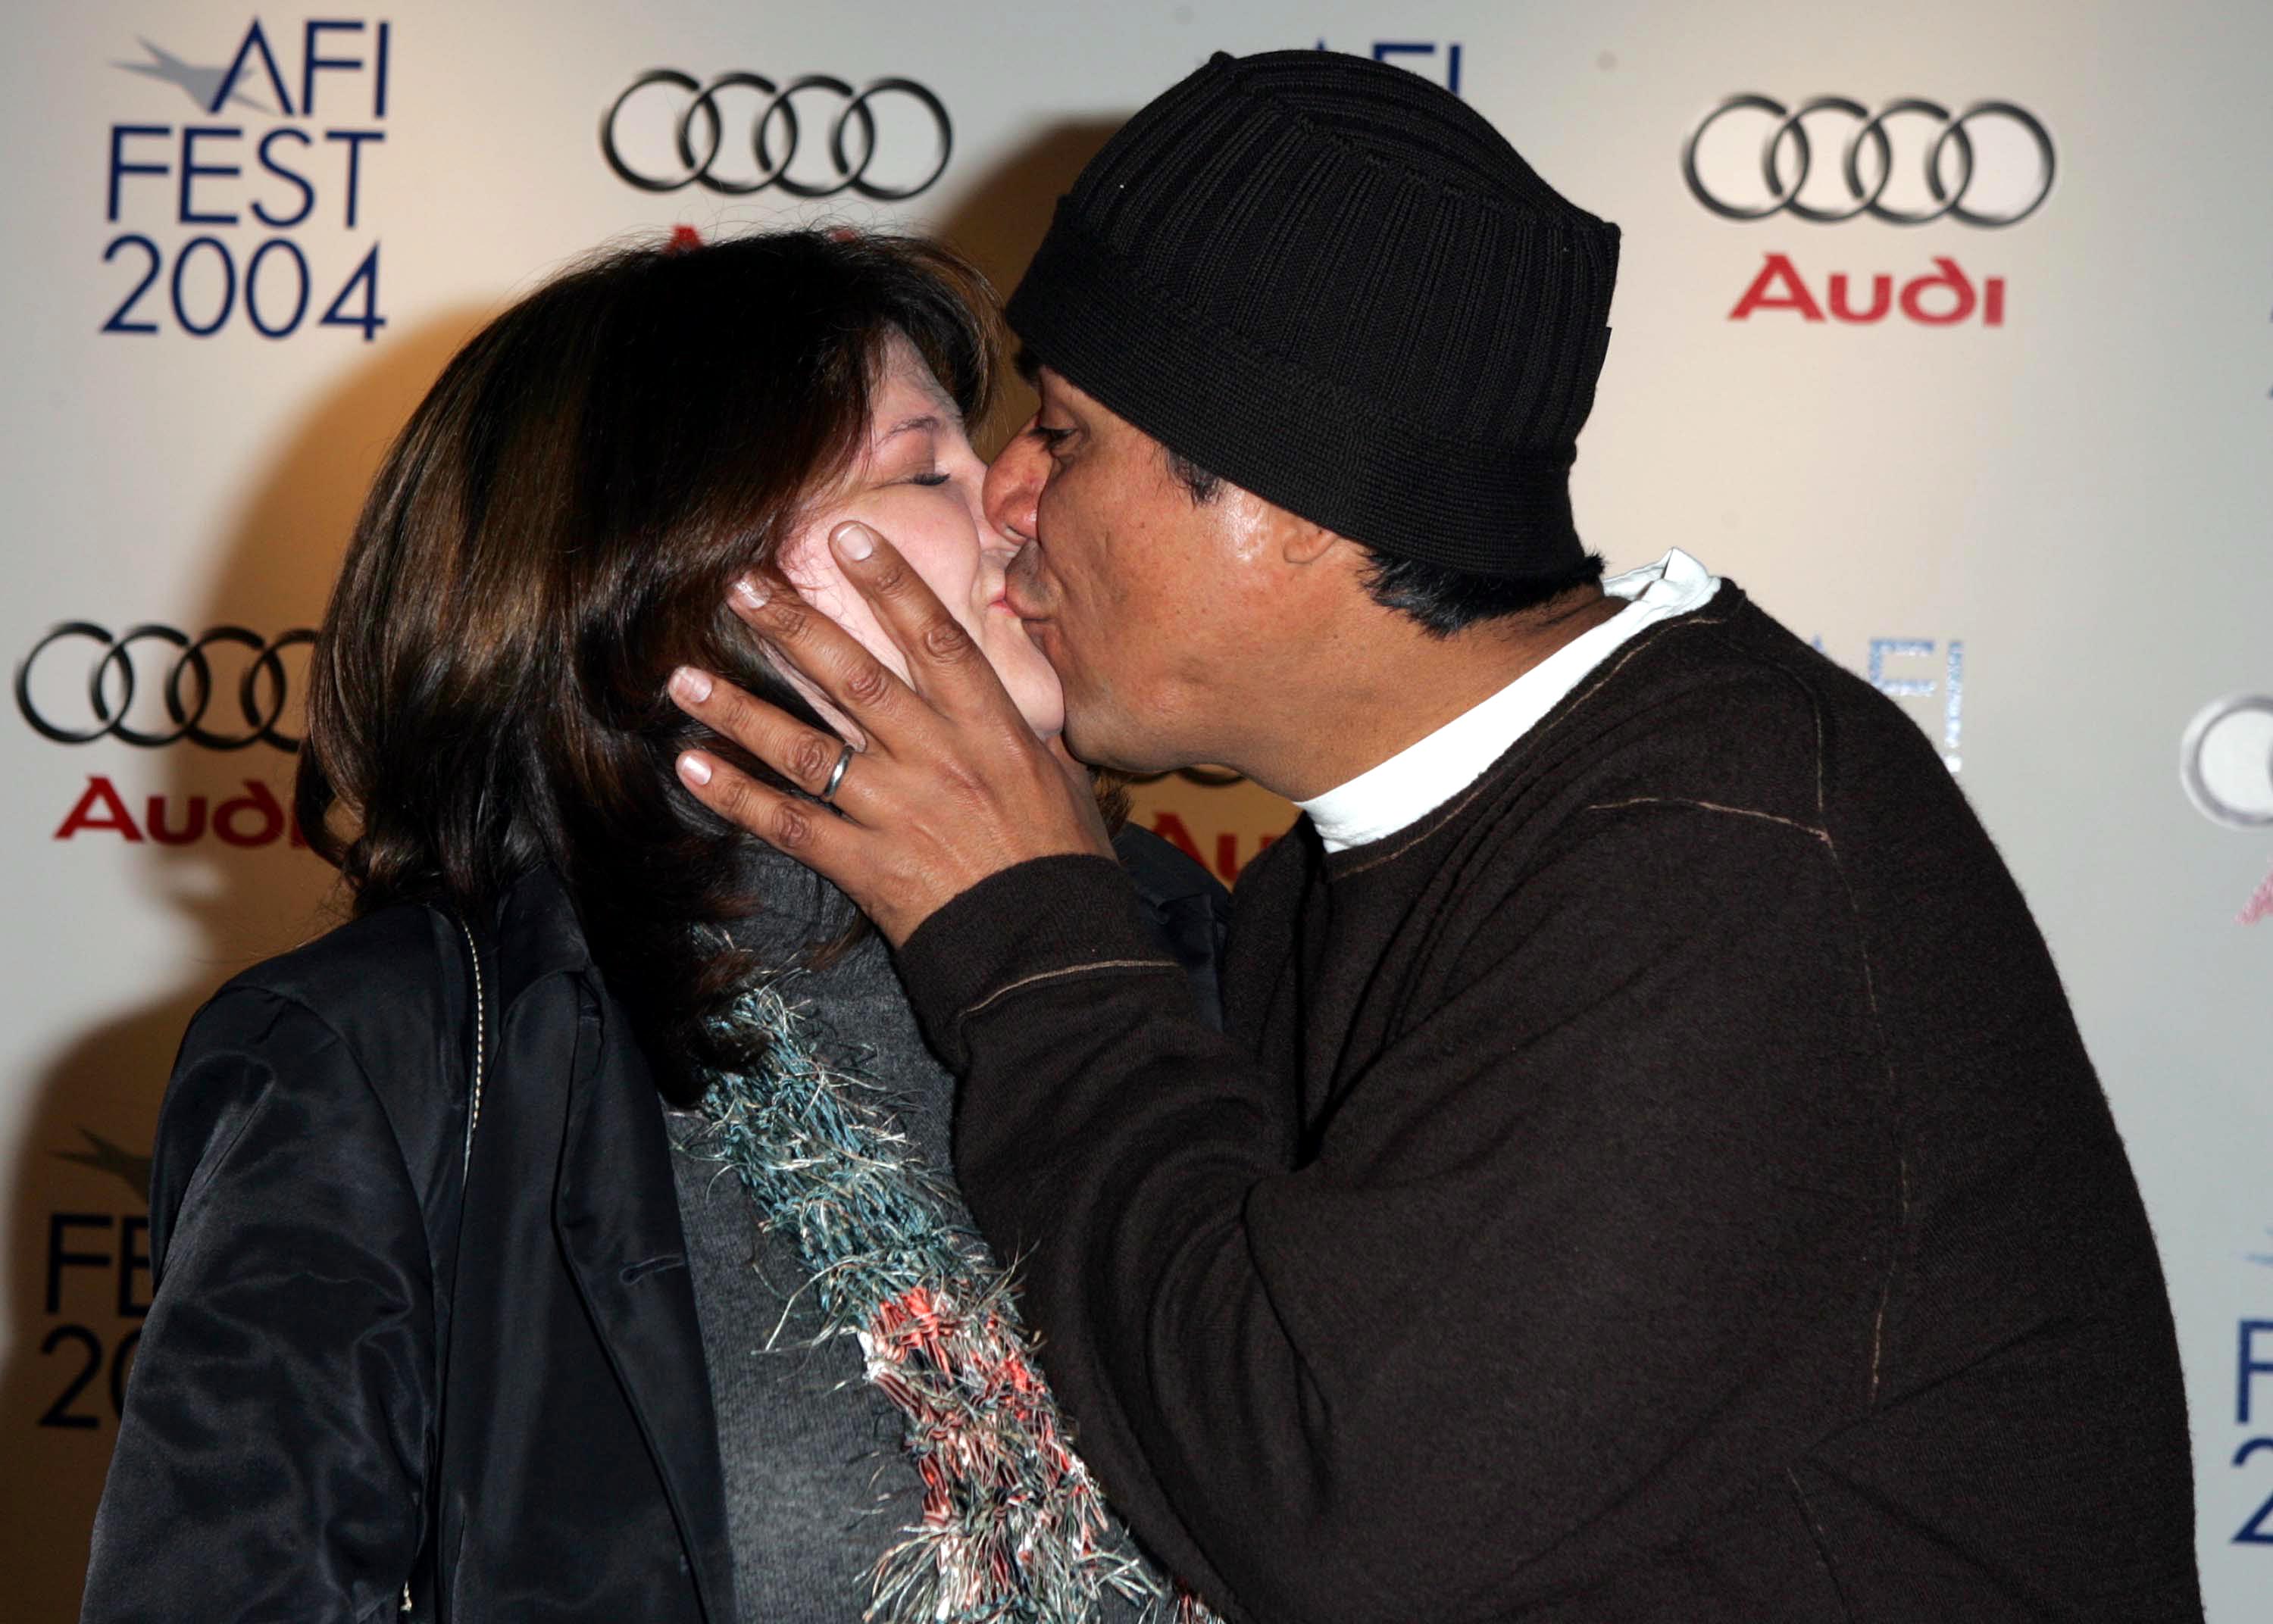 Actor George Lopez and Ann Serrano arrive at the AFI Film Festival screening of Innocent Voices at the Arclight Cinemas on November 6 2004 in Hollywood, Los Angeles. | Source: Getty Images